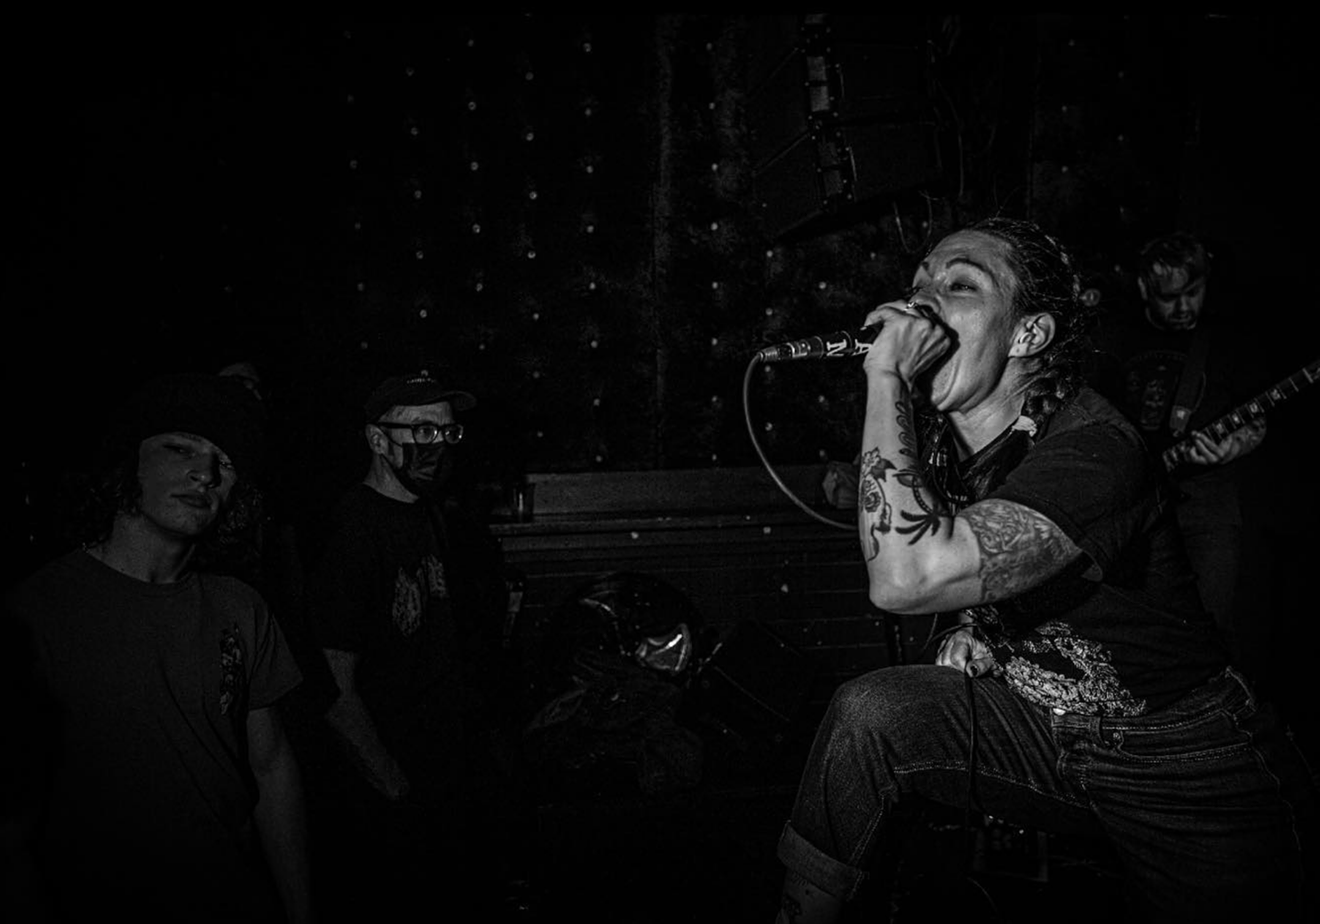 Denver hardcore group FAIM is officially retiring this month after a final hometown show.